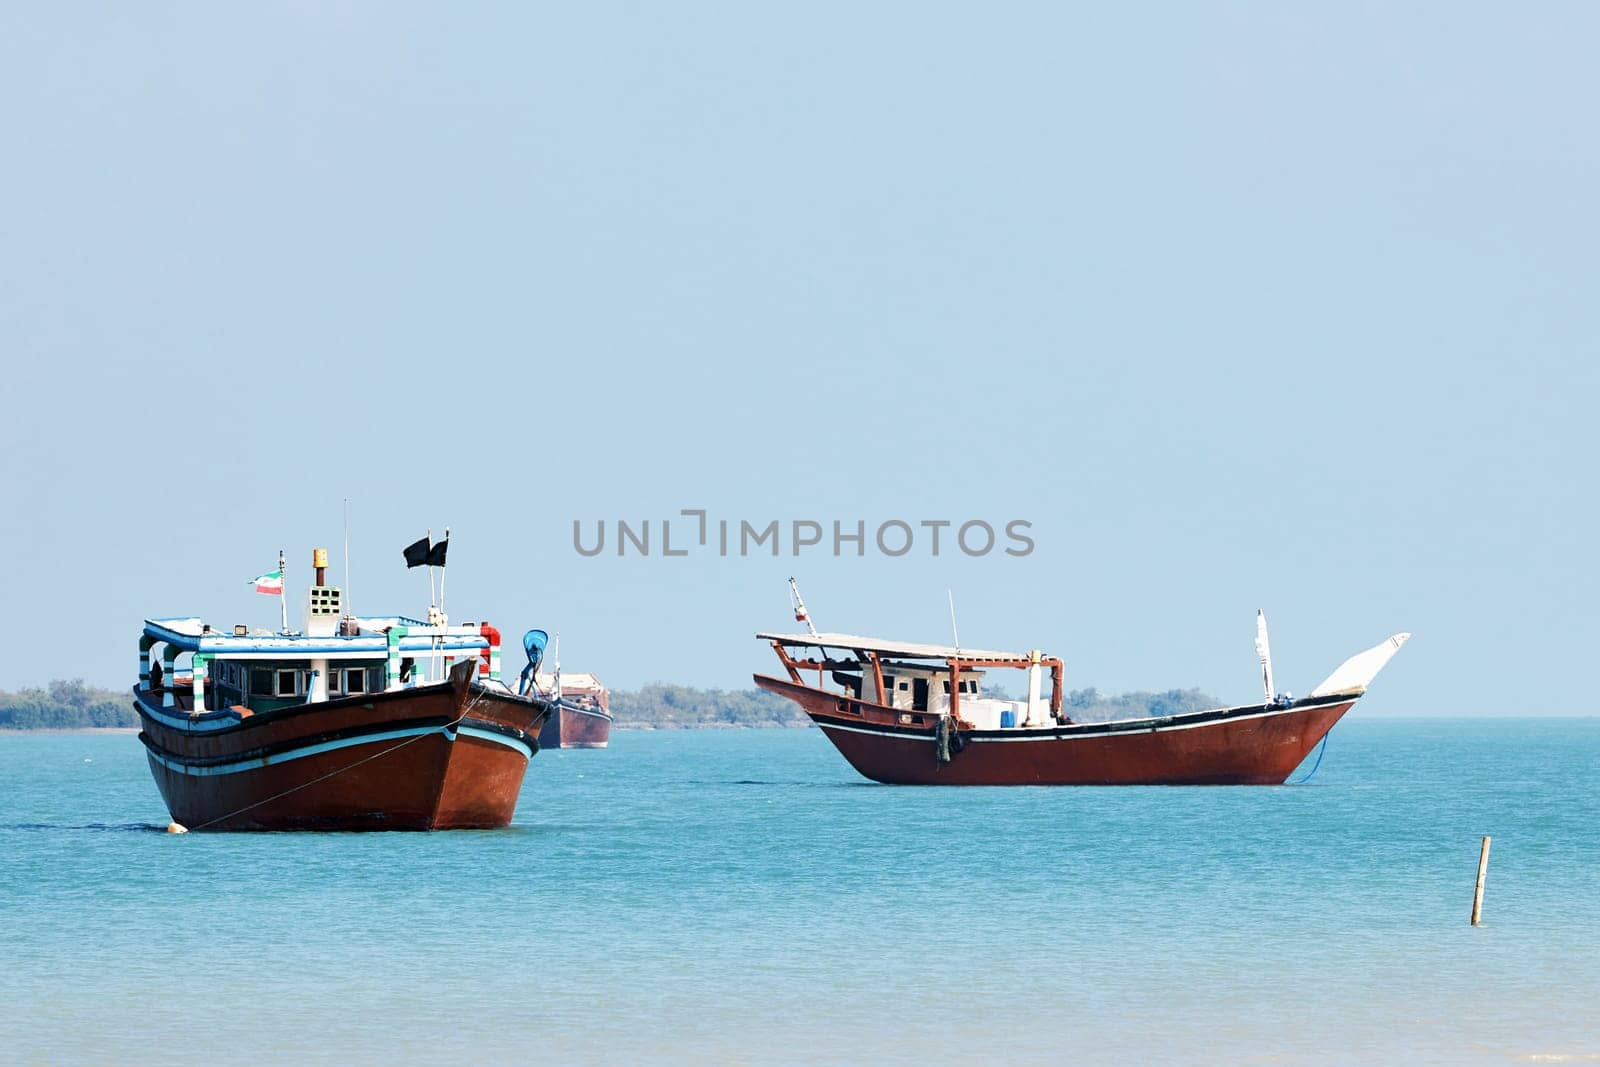 Traditional Dhow old wooden boat in the harbor of Iranian Qeshm Island. Tradition Lenj Fishing Boat in Qeshm Island in Southern Iran. Old wooden stealth smuggler's ship by EvgeniyQW